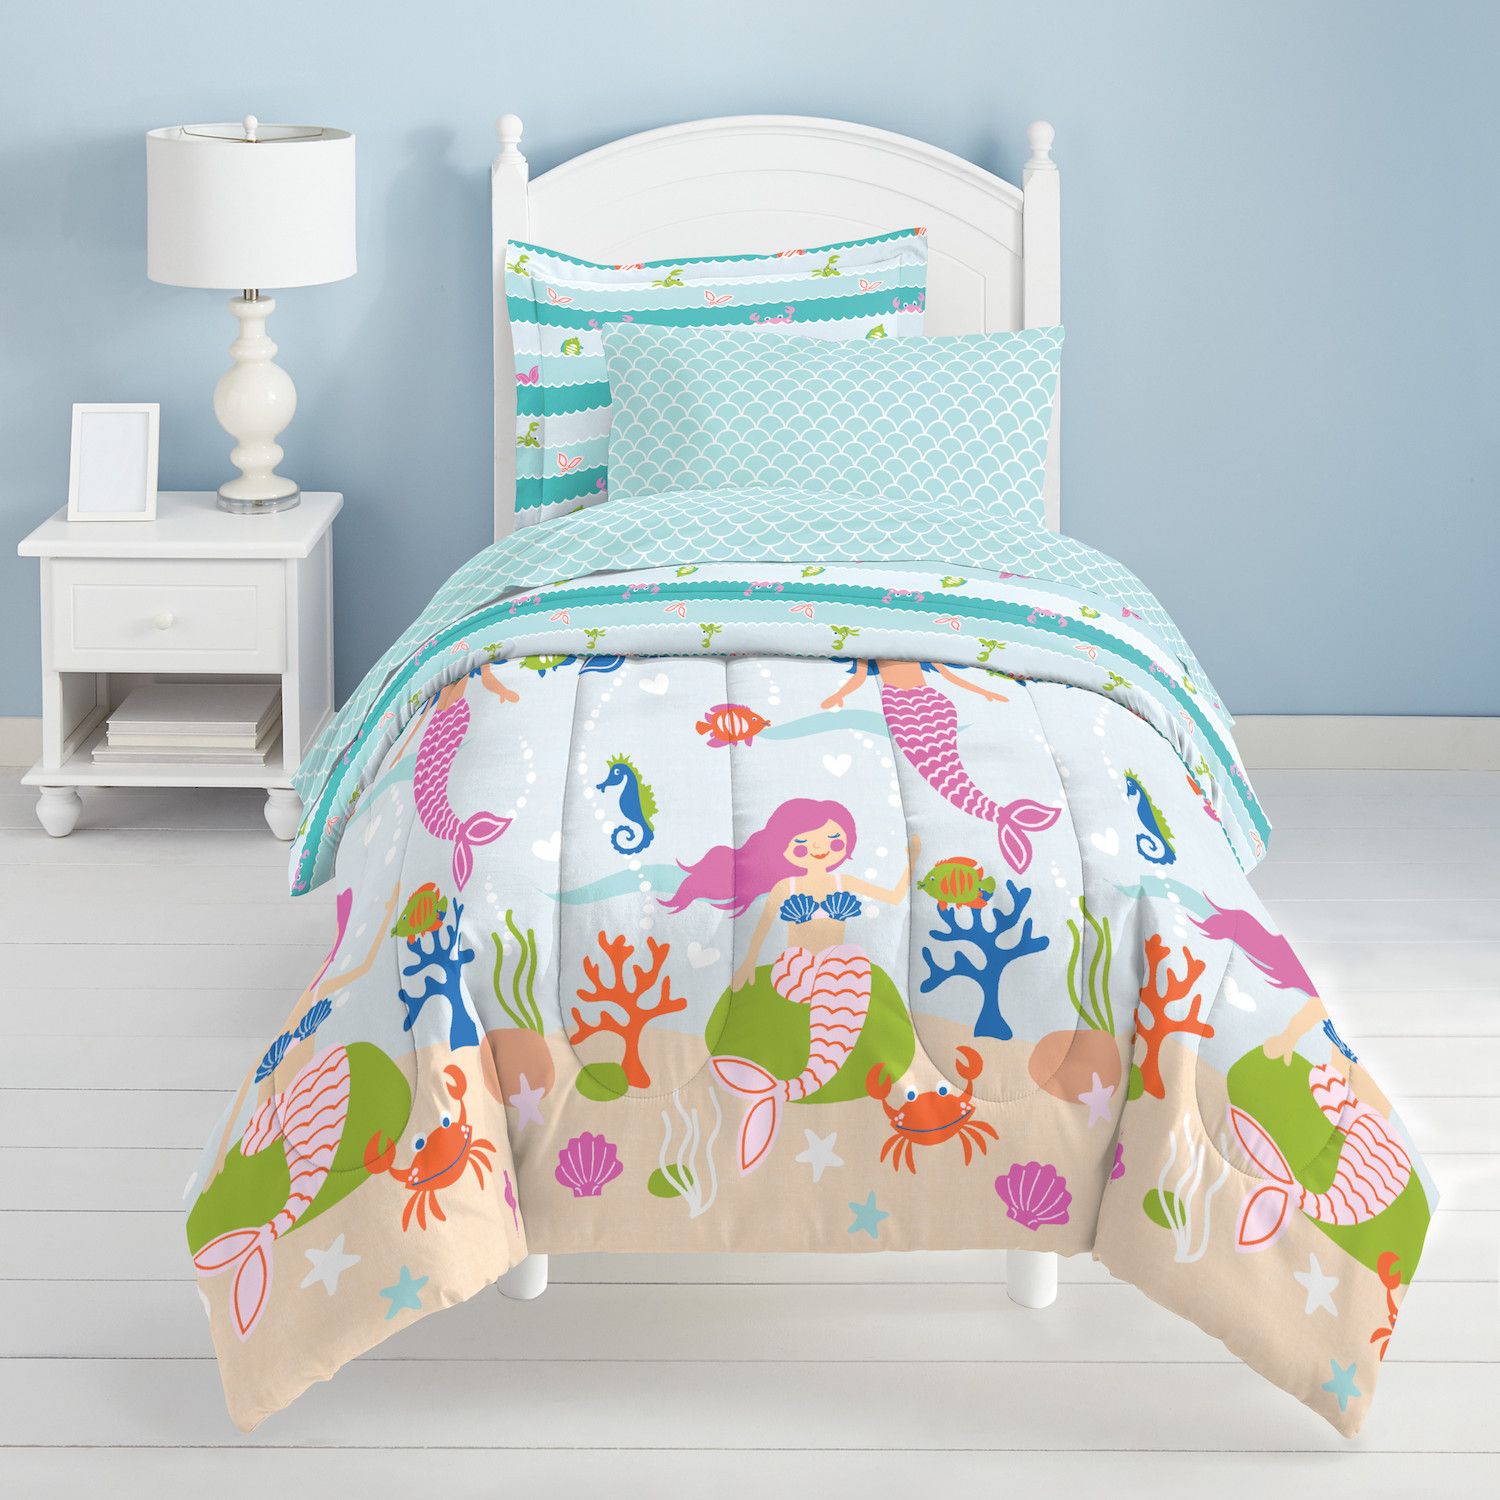 Image for Dream Factory Mermaid Dreams Bed Set at Kohl's.